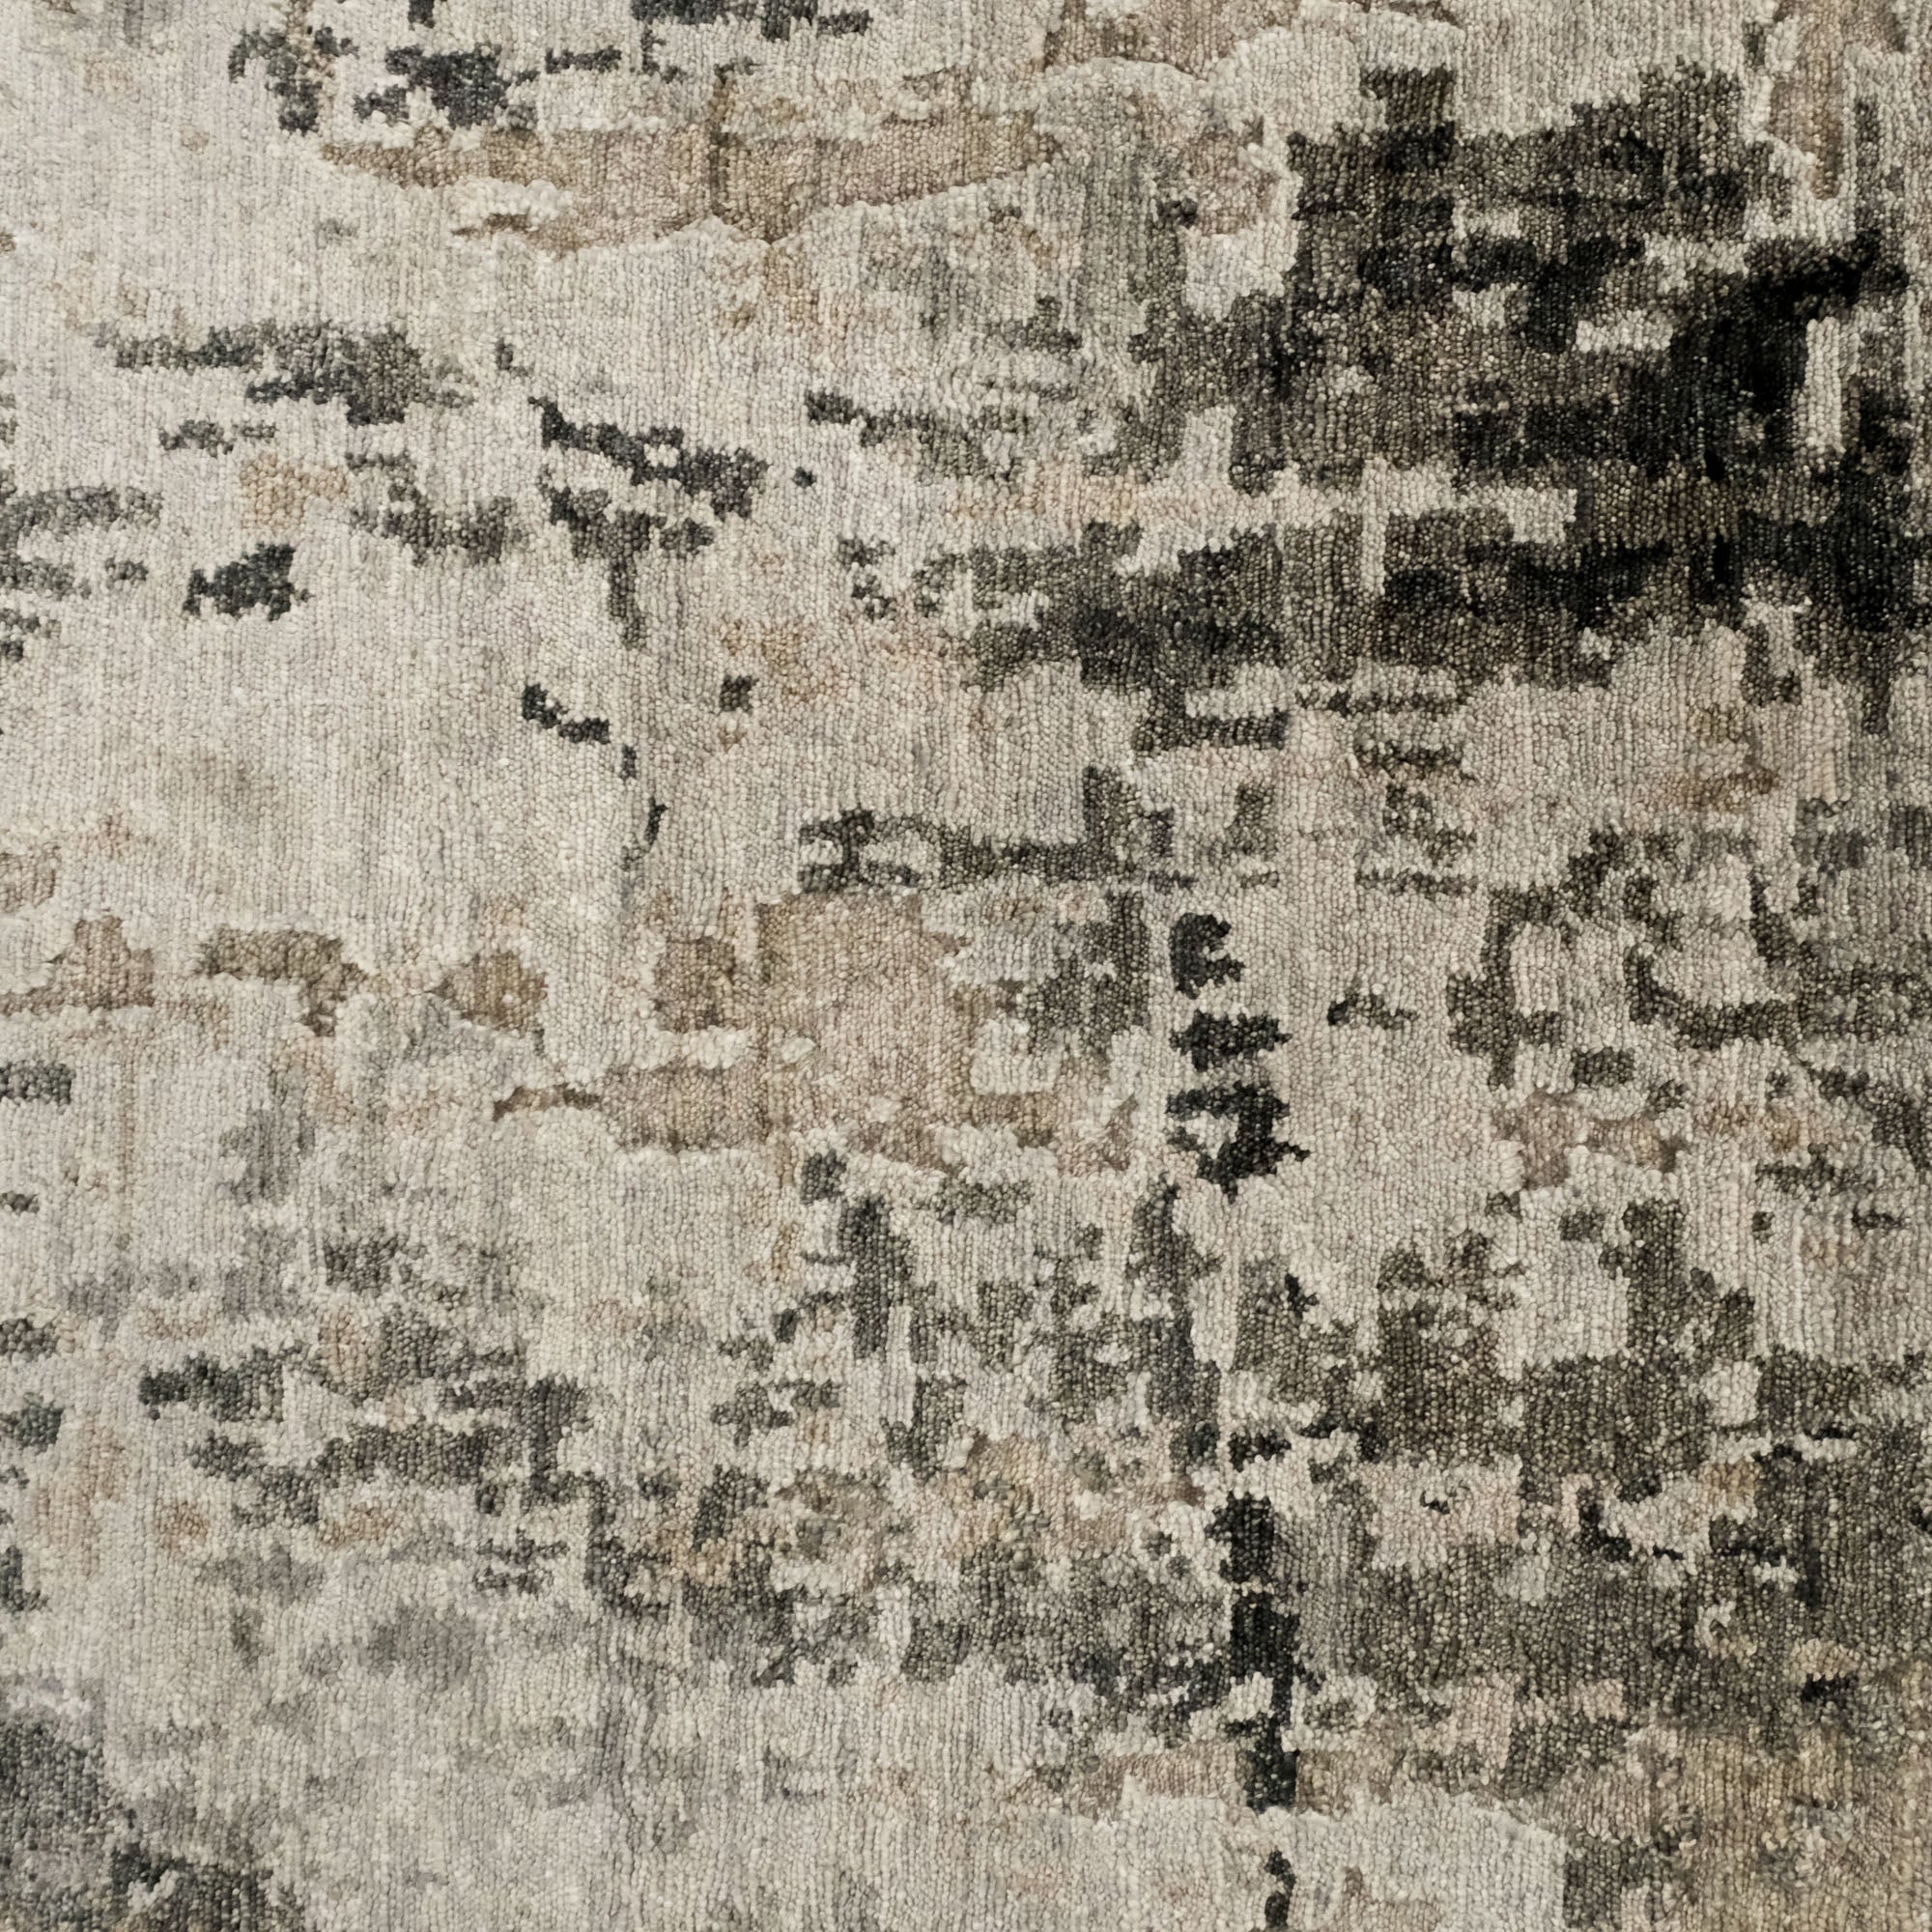 Hand Woven Abstract Patterned Gray Carpet